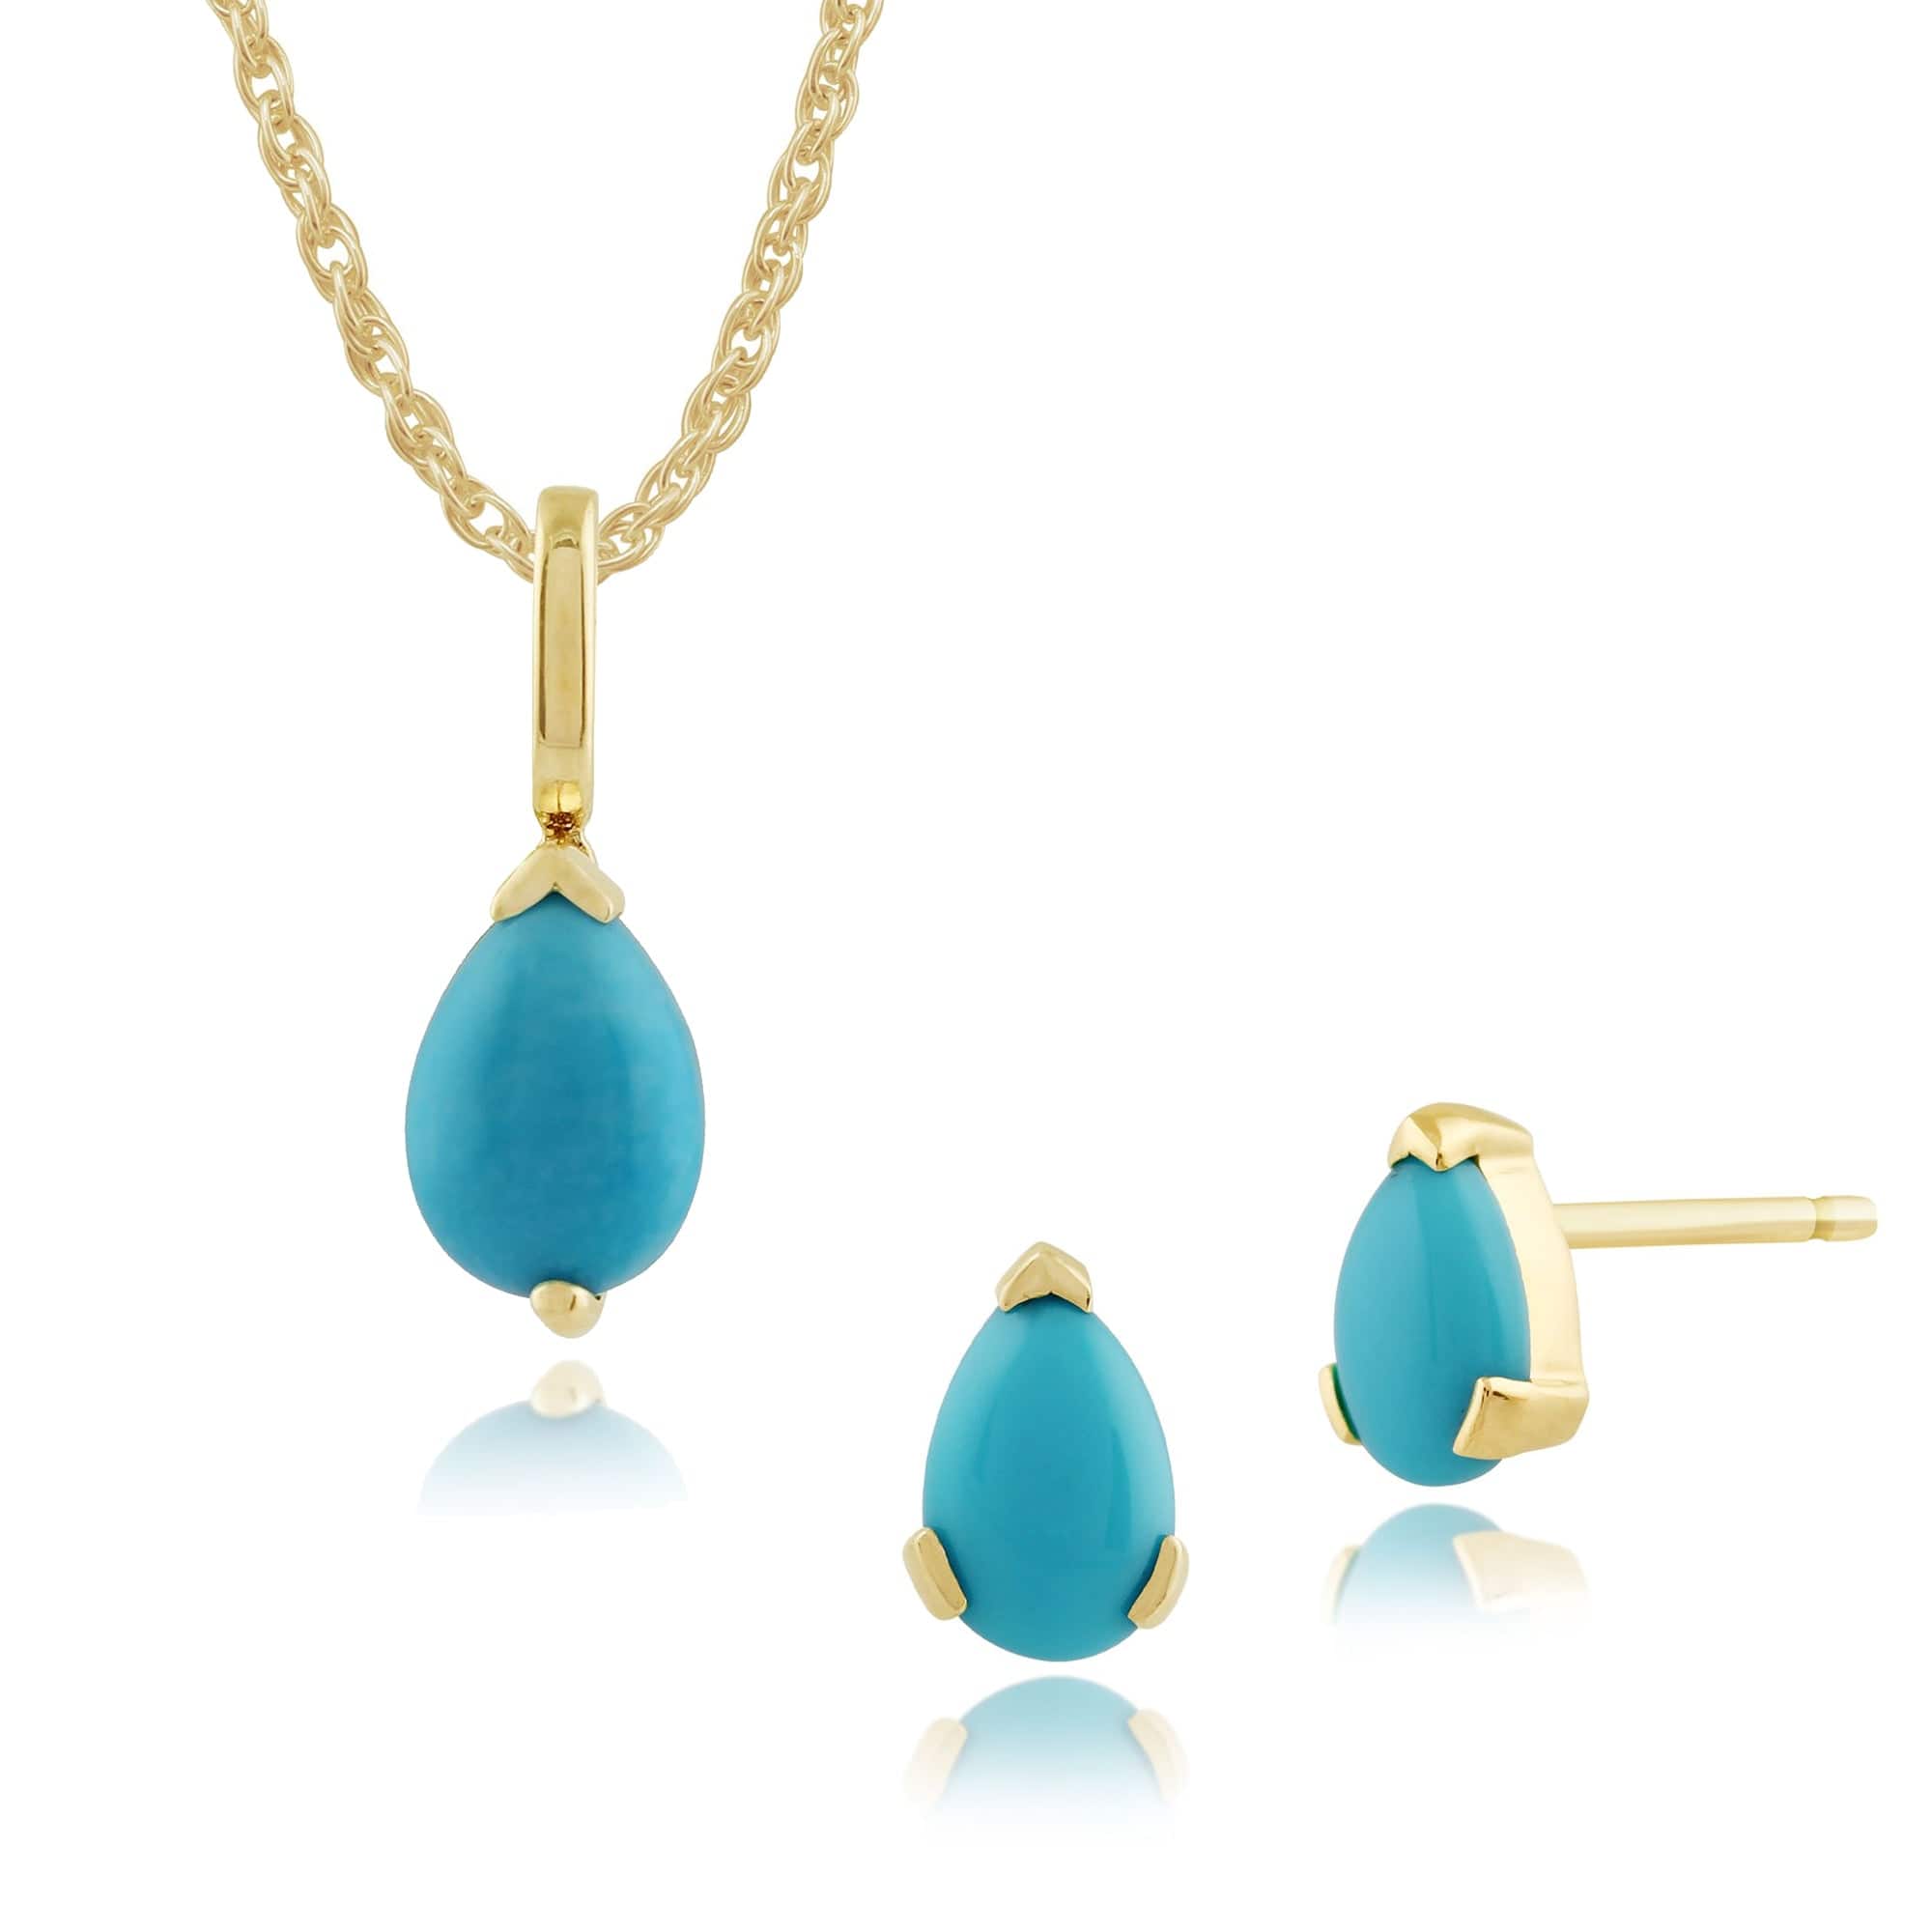 123E0606199-123P0117269 Classic Pear Turquoise Single Stone Stud Earrings & Pendant Set in 9ct Yellow Gold 1